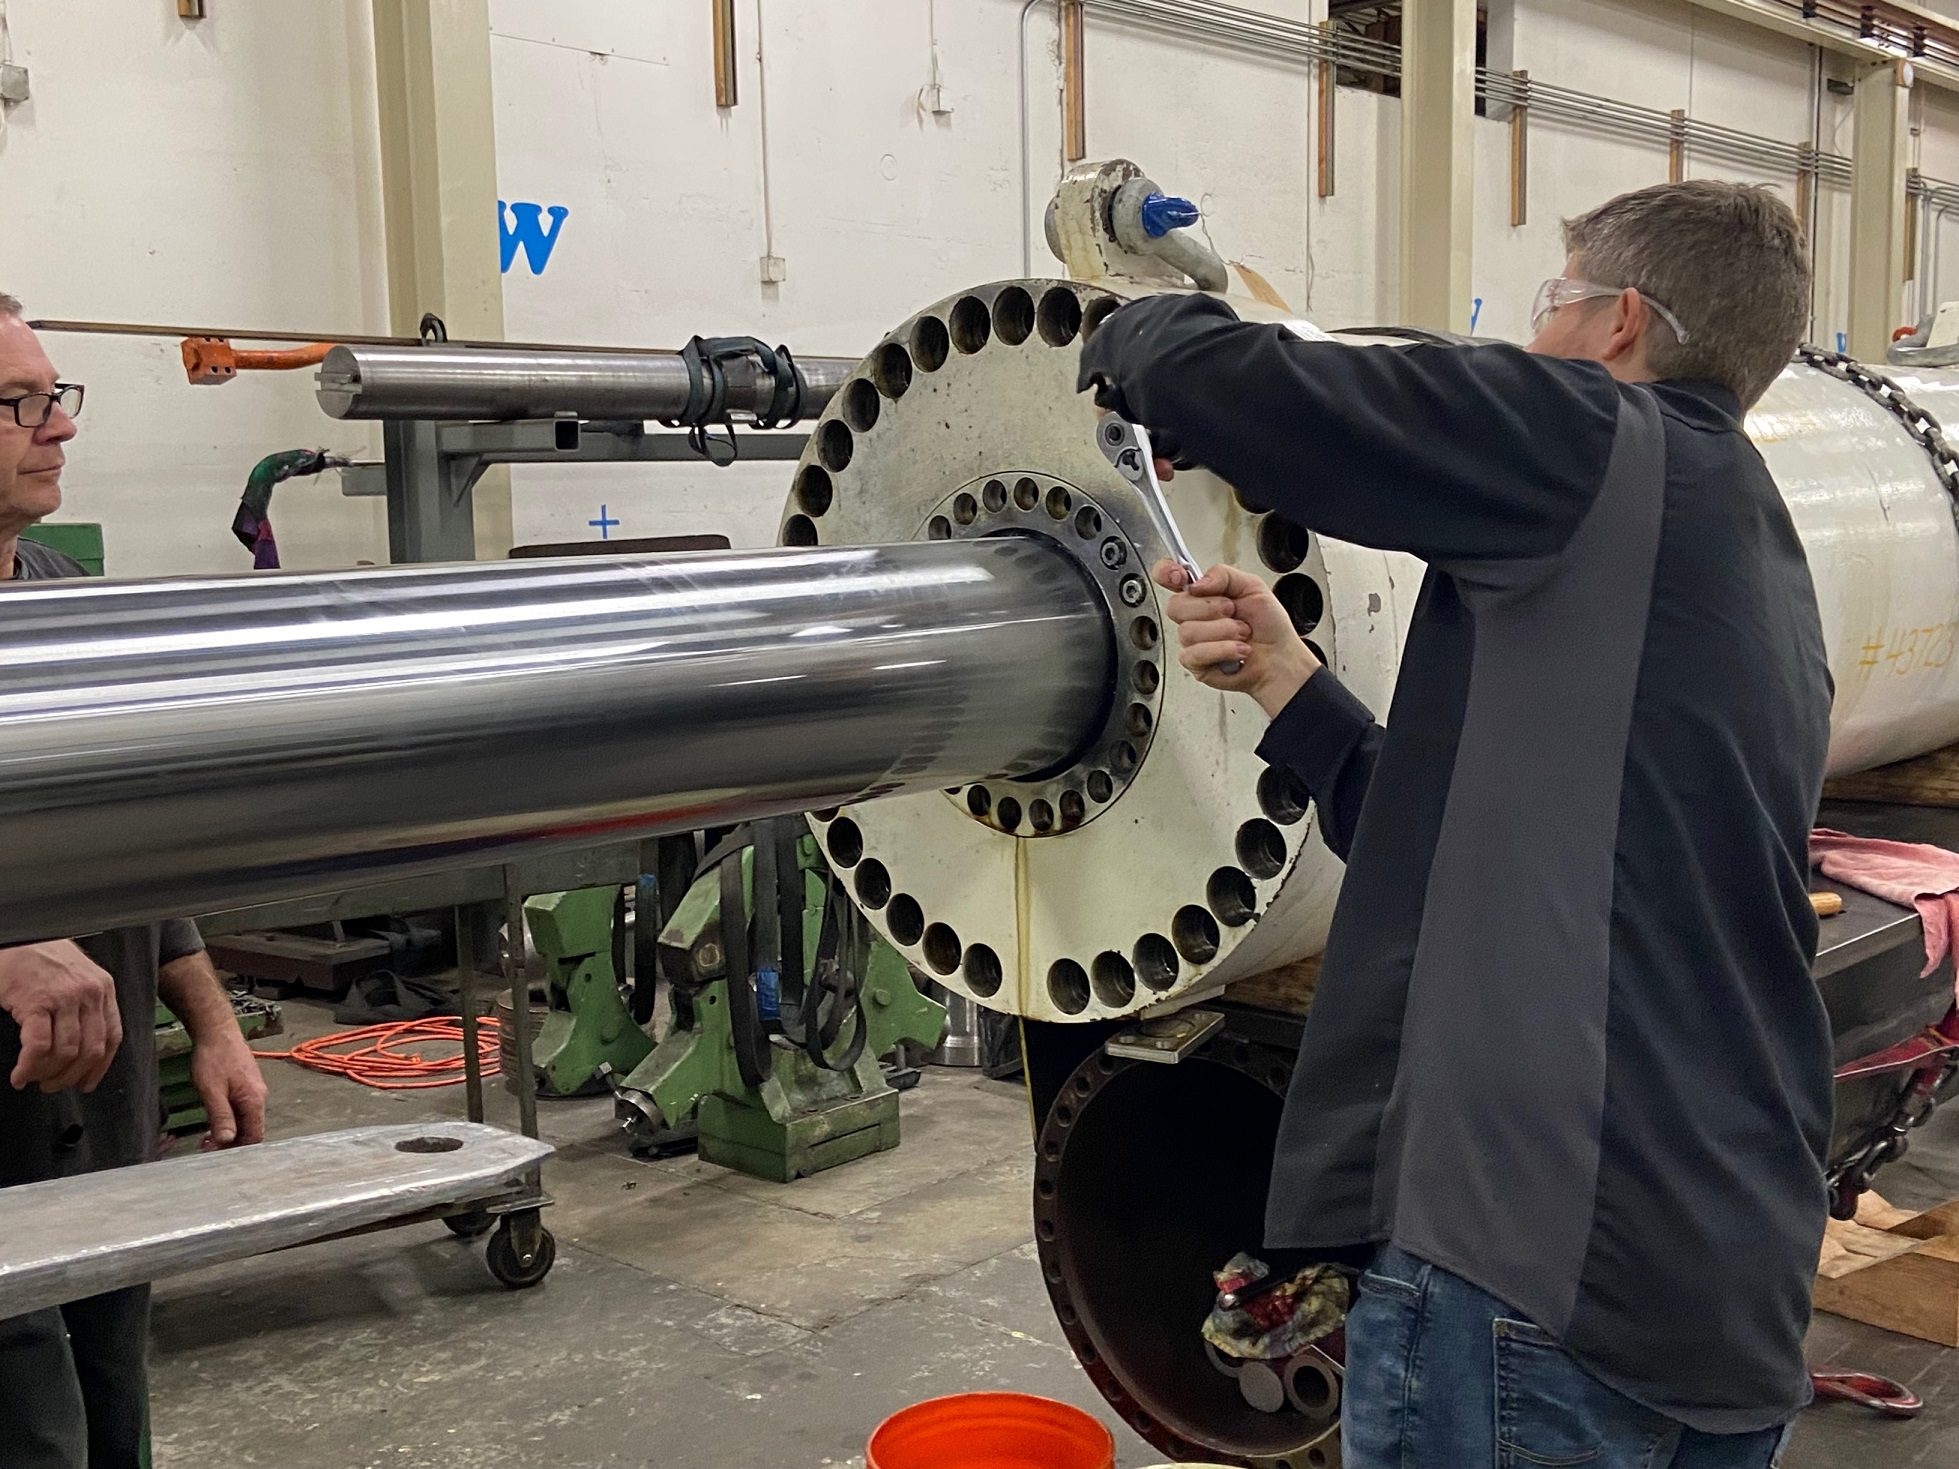 Specialists working on the massive hydraulic turning cylinder. The person working wears safety glasses and a black jacket, inside a building with white walls.